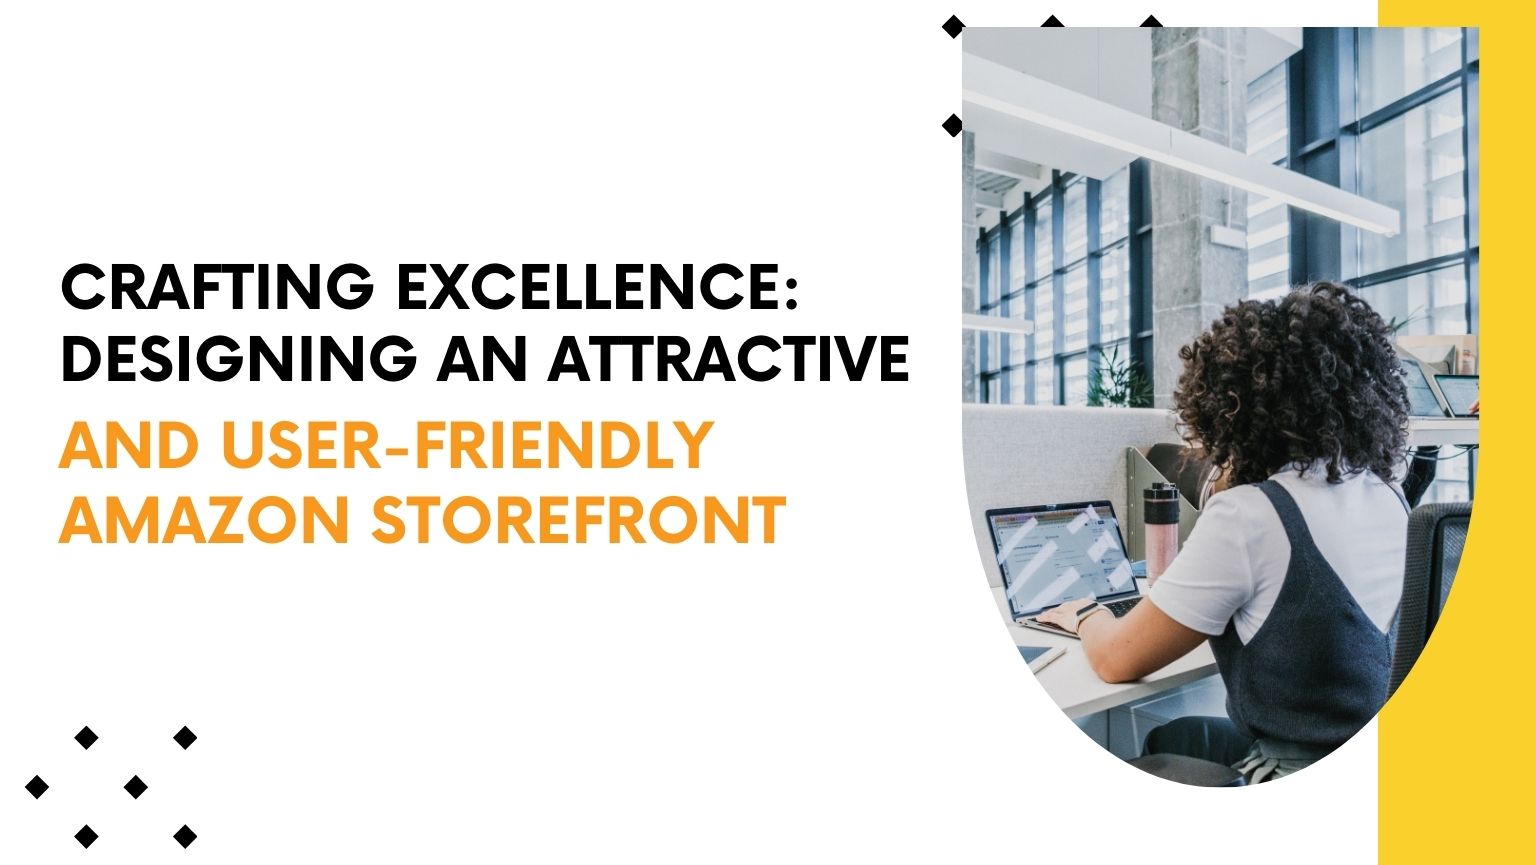 Crafting Excellence: Designing an Attractive and User-Friendly Amazon Storefront